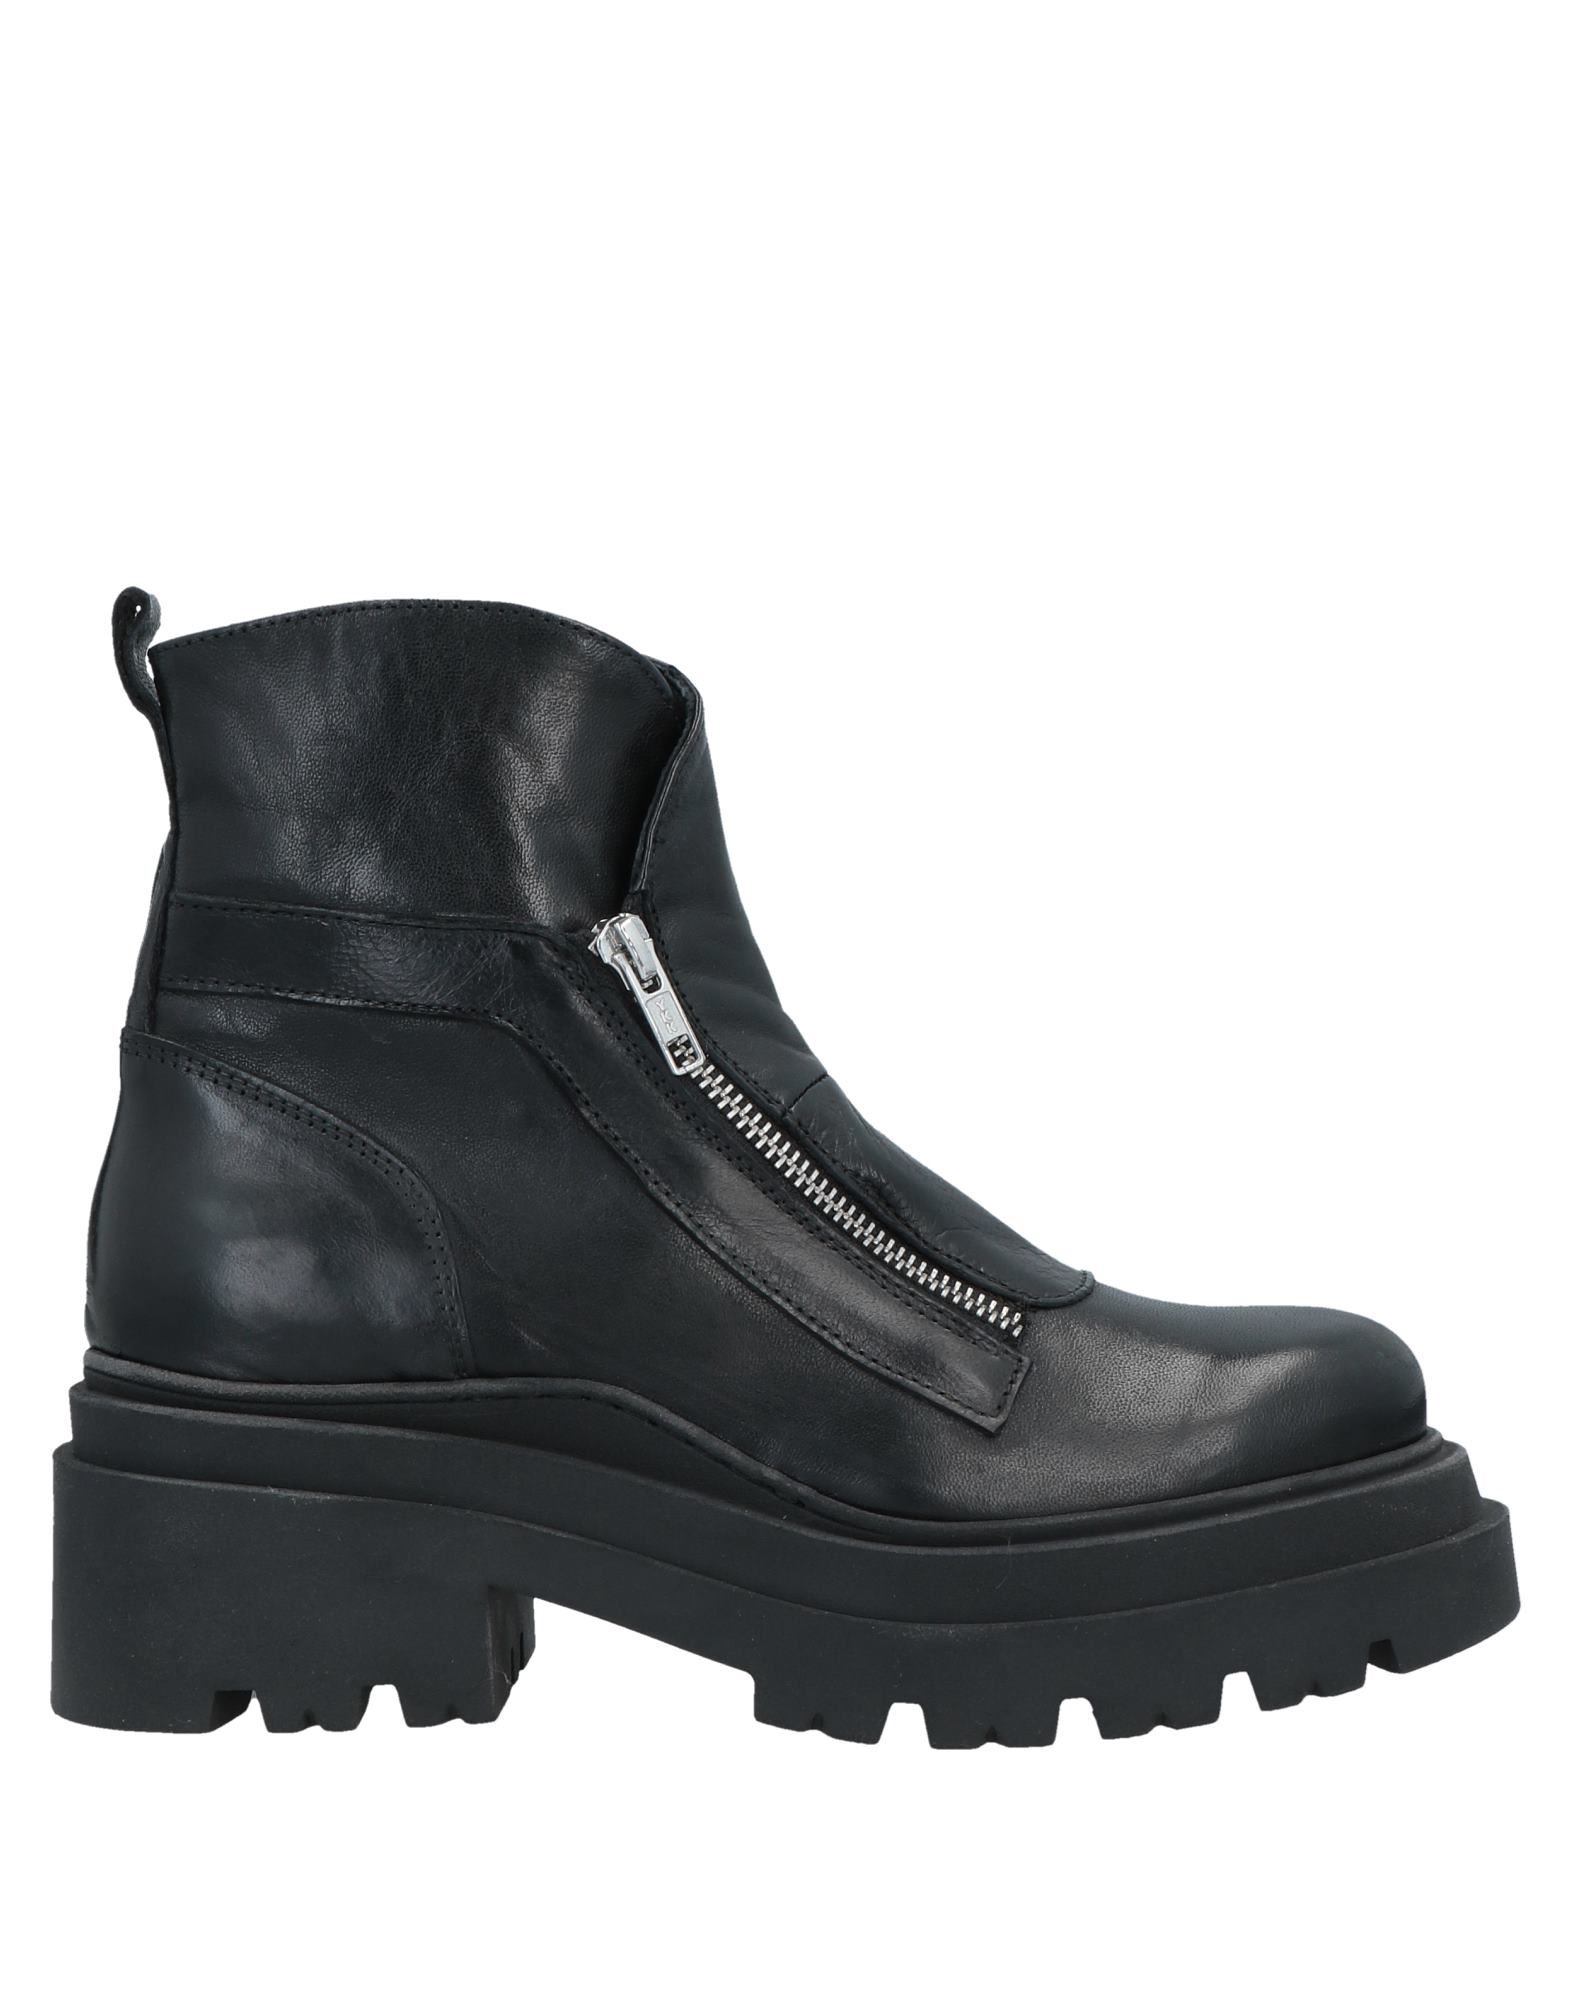 Oroscuro Ankle Boots In Black